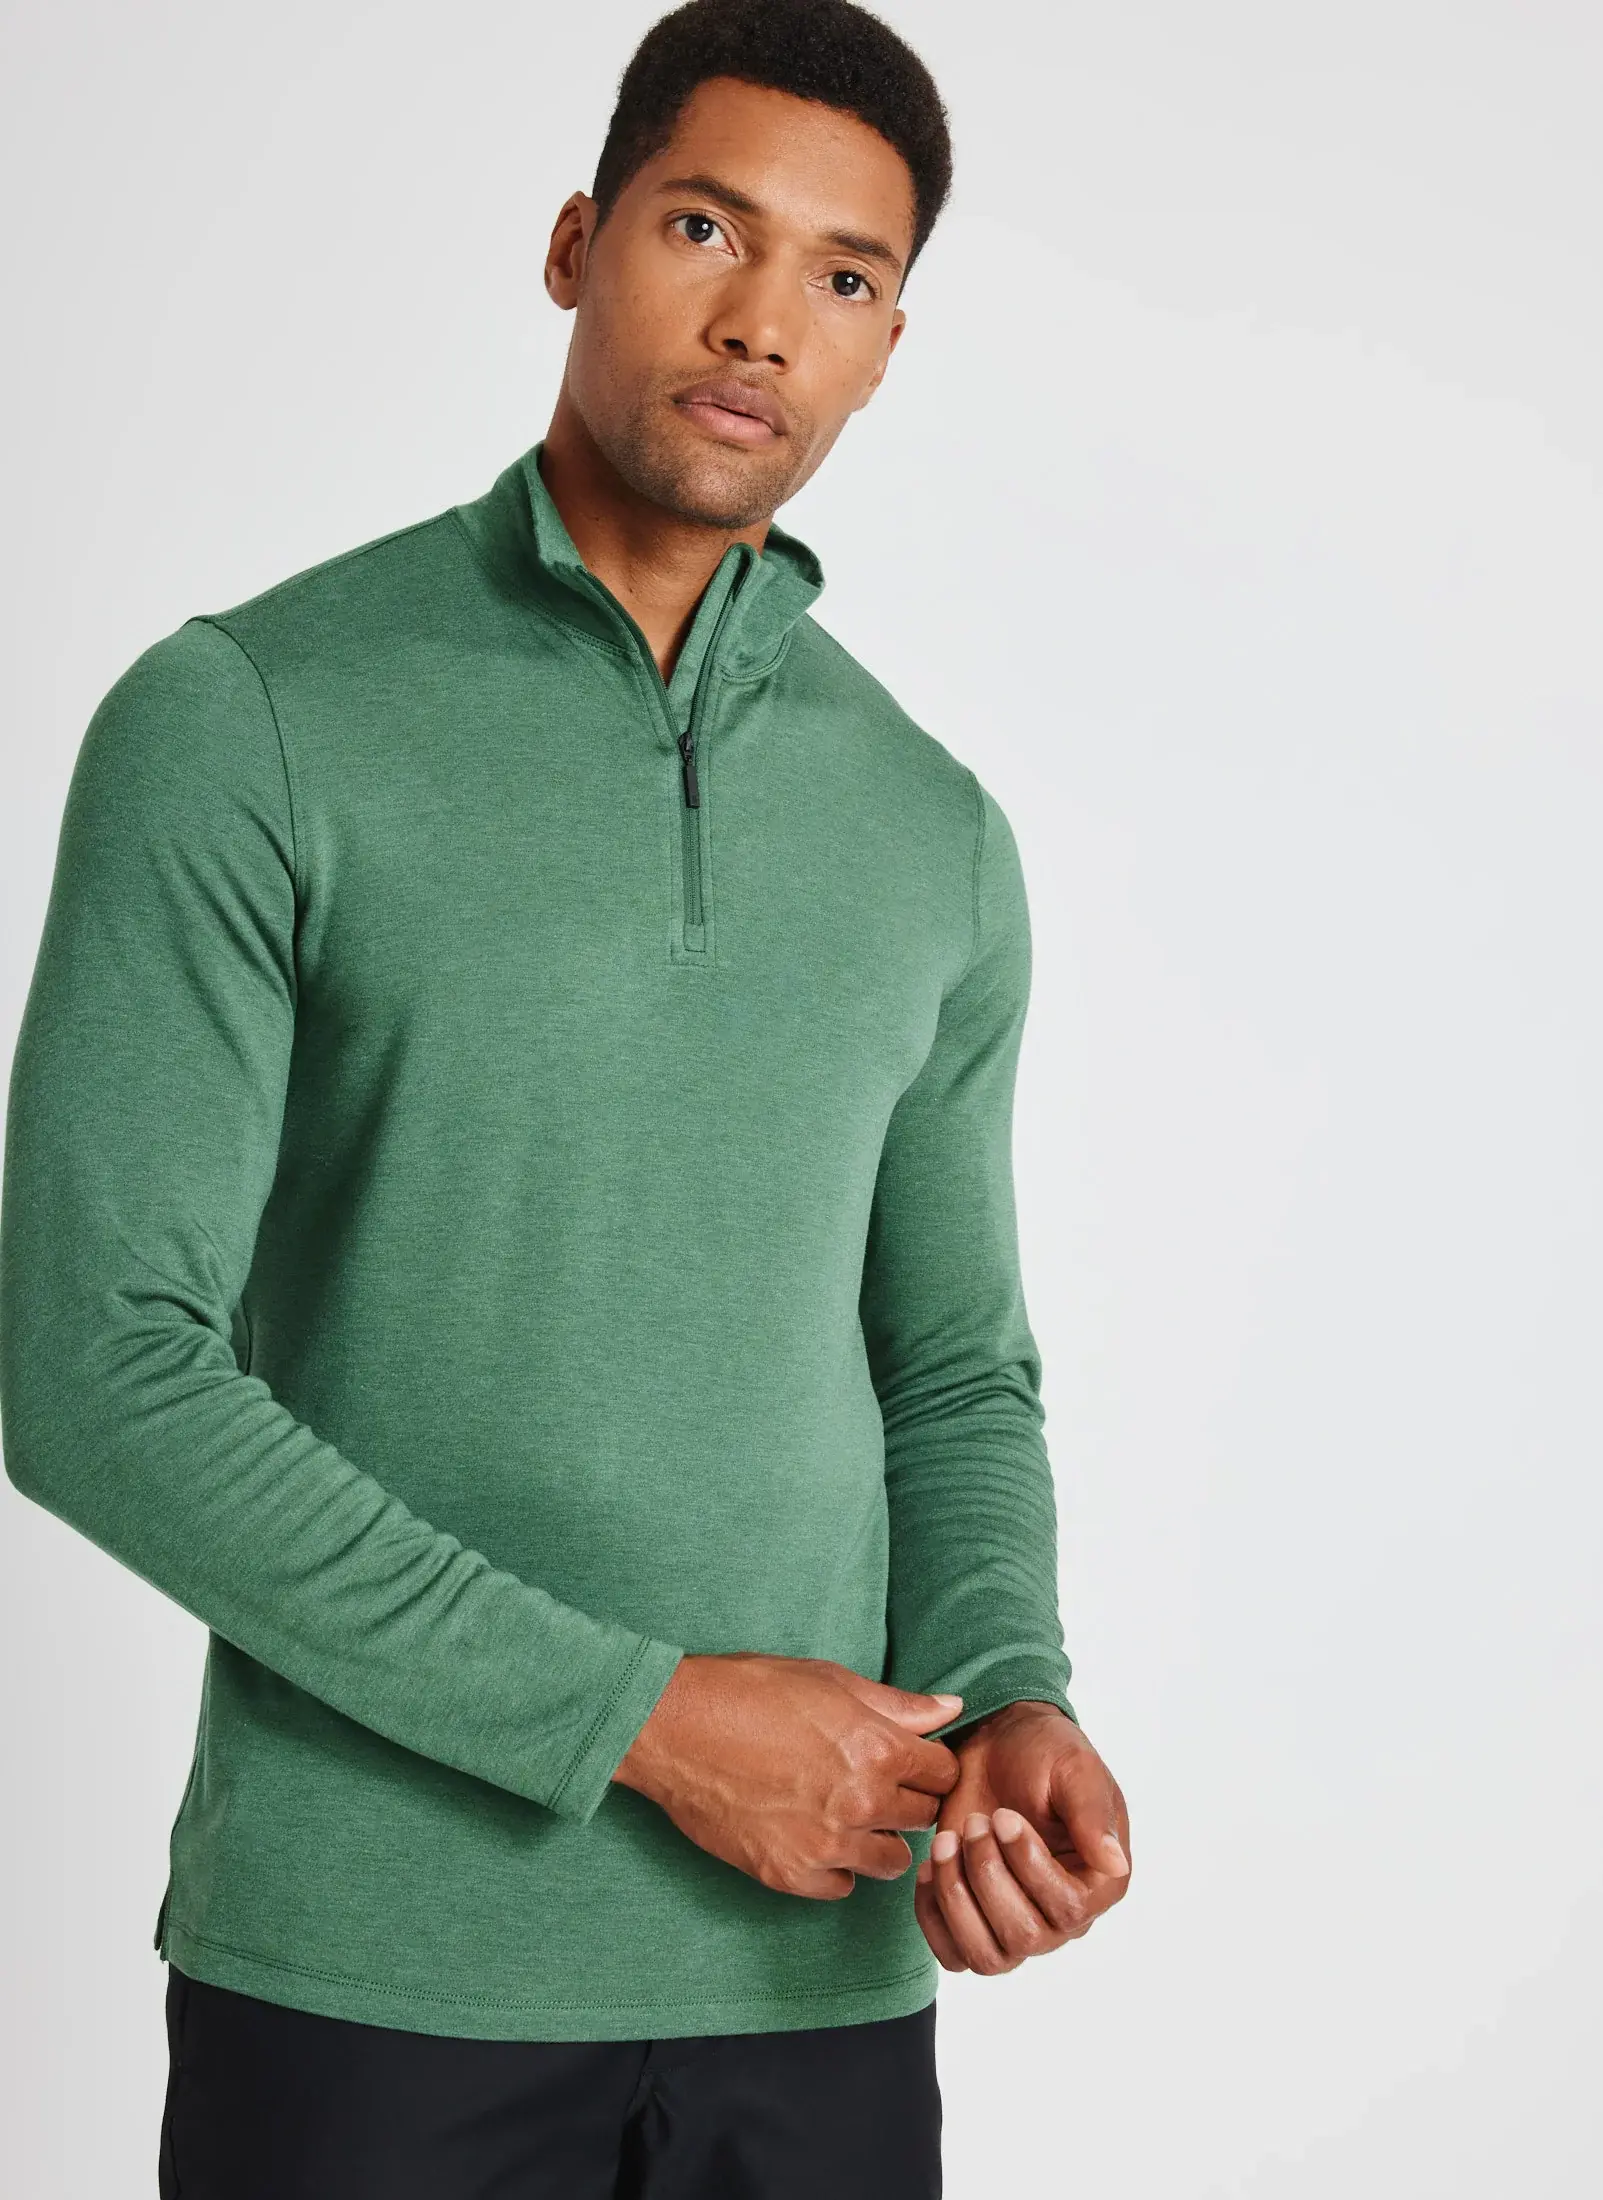 Kit And Ace Comfy Quarter Zip Pullover. 1